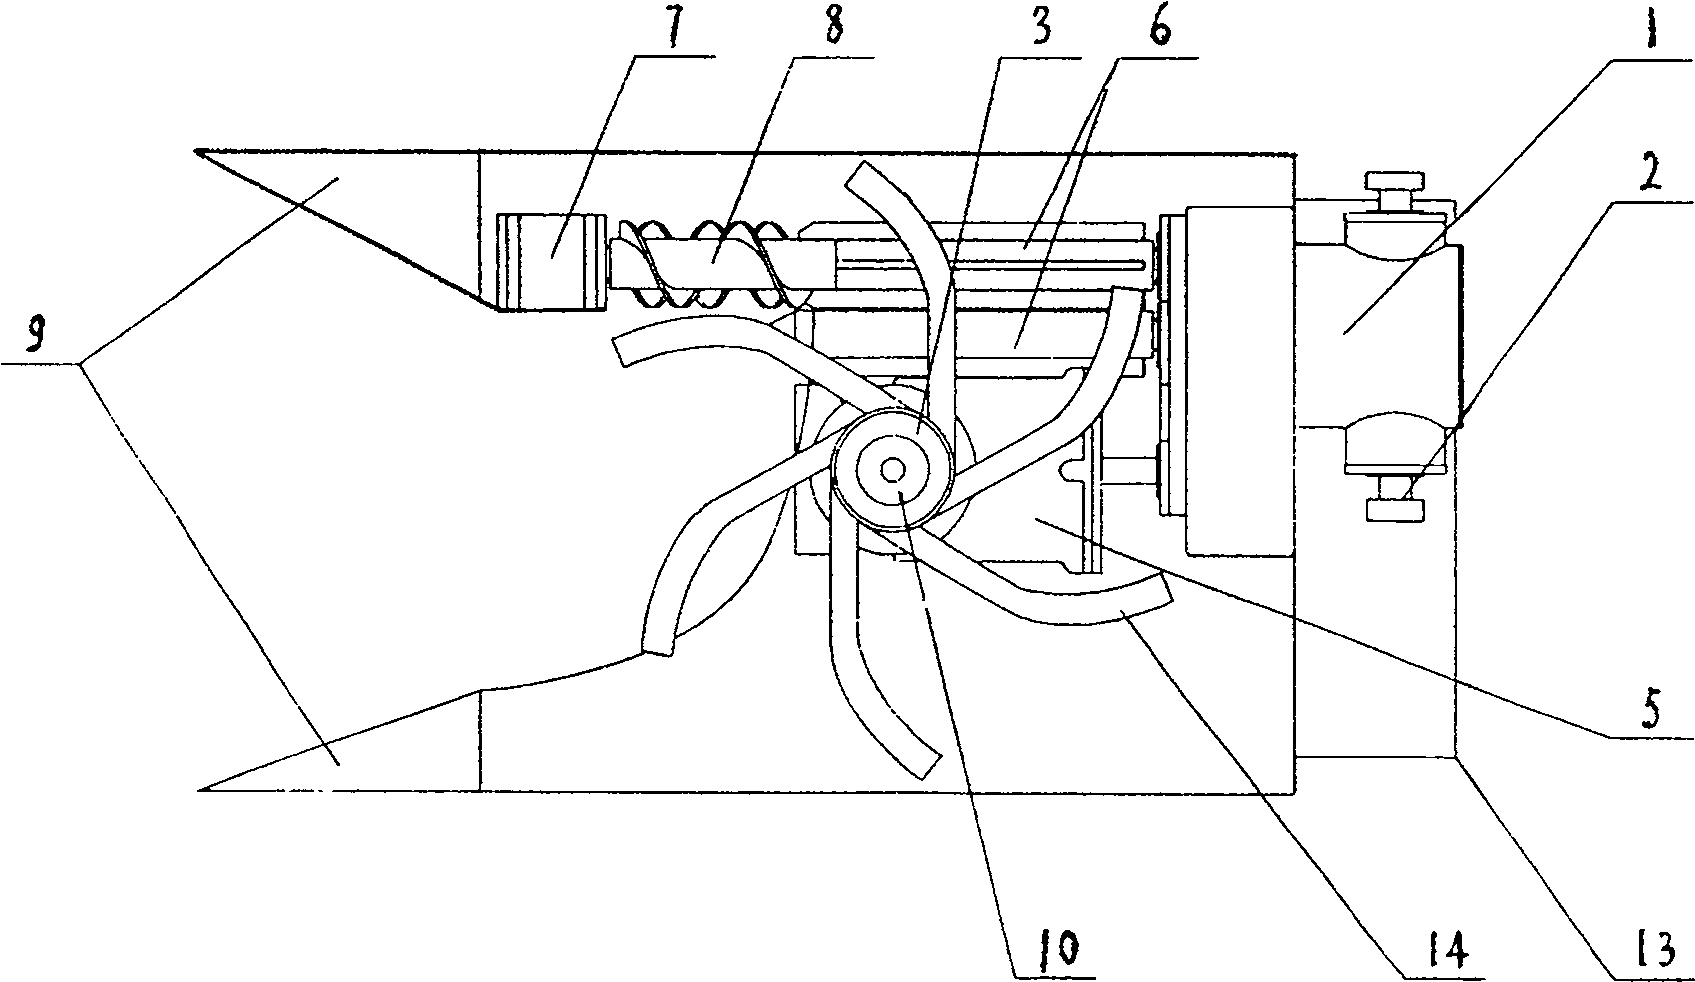 Chainless type maize harvesting and stalk returning device